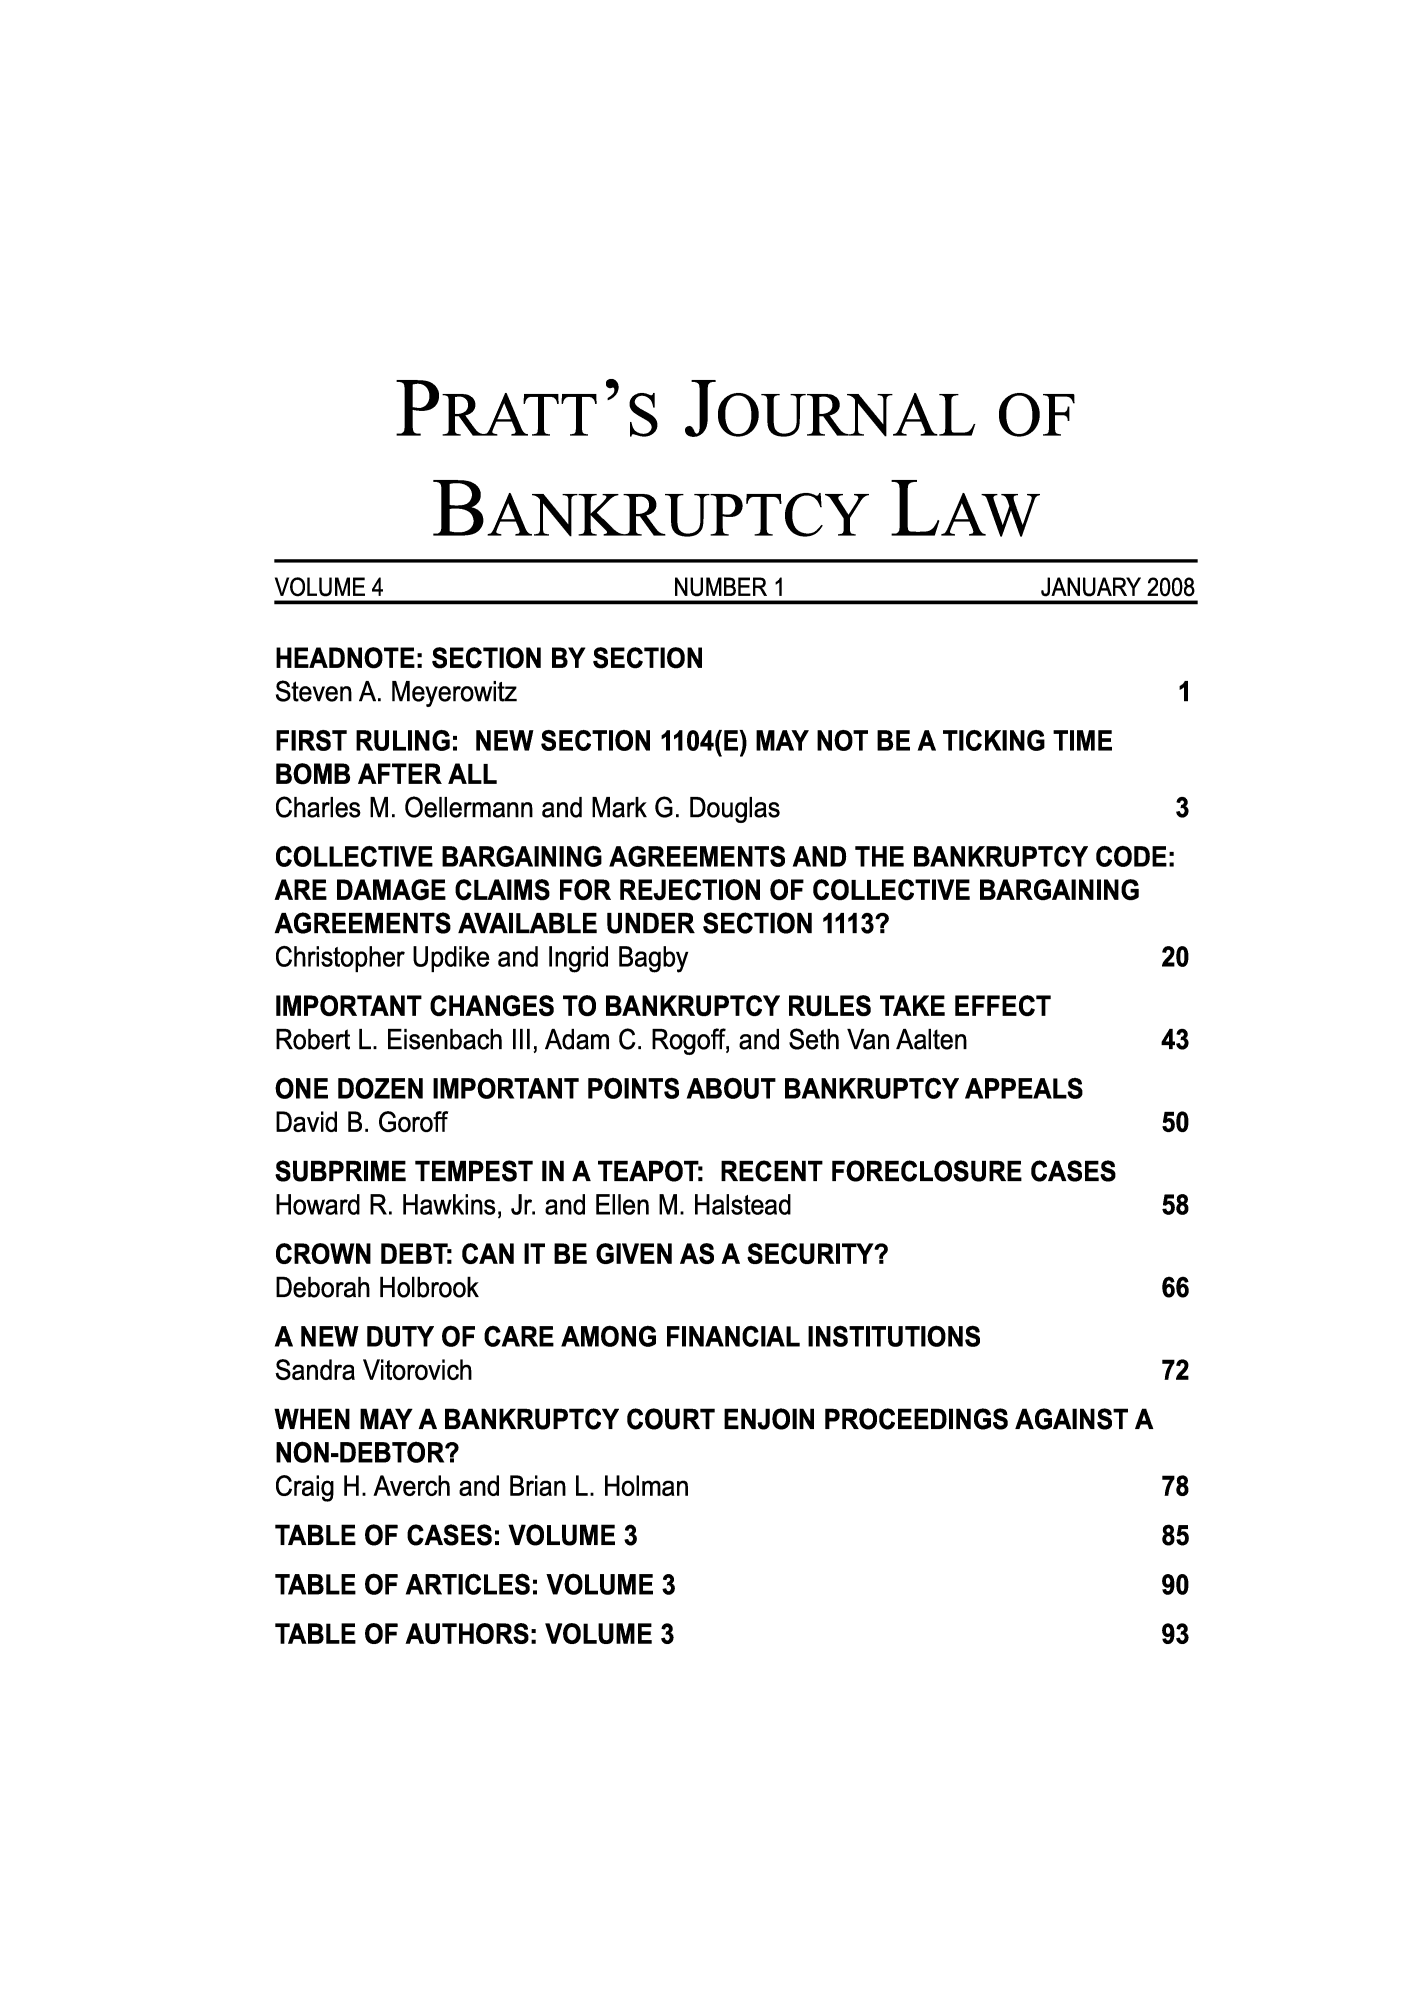 handle is hein.journals/prattjb4 and id is 1 raw text is: PRATT'S JOURNAL OF
BANKRUPTCY LAW
VOLUME 4                 NUMBER 1              JANUARY 2008
HEADNOTE: SECTION BY SECTION
Steven A. Meyerowitz                                    I
FIRST RULING: NEW SECTION 1104(E) MAY NOT BE A TICKING TIME
BOMB AFTER ALL
Charles M. Oellermann and Mark G. Douglas               3
COLLECTIVE BARGAINING AGREEMENTS AND THE BANKRUPTCY CODE:
ARE DAMAGE CLAIMS FOR REJECTION OF COLLECTIVE BARGAINING
AGREEMENTS AVAILABLE UNDER SECTION 1113?
Christopher Updike and Ingrid Bagby                    20
IMPORTANT CHANGES TO BANKRUPTCY RULES TAKE EFFECT
Robert L. Eisenbach III, Adam C. Rogoff, and Seth Van Aalten  43
ONE DOZEN IMPORTANT POINTS ABOUT BANKRUPTCY APPEALS
David B. Goroff                                        50
SUBPRIME TEMPEST IN A TEAPOT: RECENT FORECLOSURE CASES
Howard R. Hawkins, Jr. and Ellen M. Halstead           58
CROWN DEBT: CAN IT BE GIVEN AS A SECURITY?
Deborah Holbrook                                       66
A NEW DUTY OF CARE AMONG FINANCIAL INSTITUTIONS
Sandra Vitorovich                                      72
WHEN MAY A BANKRUPTCY COURT ENJOIN PROCEEDINGS AGAINST A
NON-DEBTOR?
Craig H. Averch and Brian L. Holman                    78
TABLE OF CASES: VOLUME 3                               85
TABLE OF ARTICLES: VOLUME 3                            90
TABLE OF AUTHORS: VOLUME 3                             93


